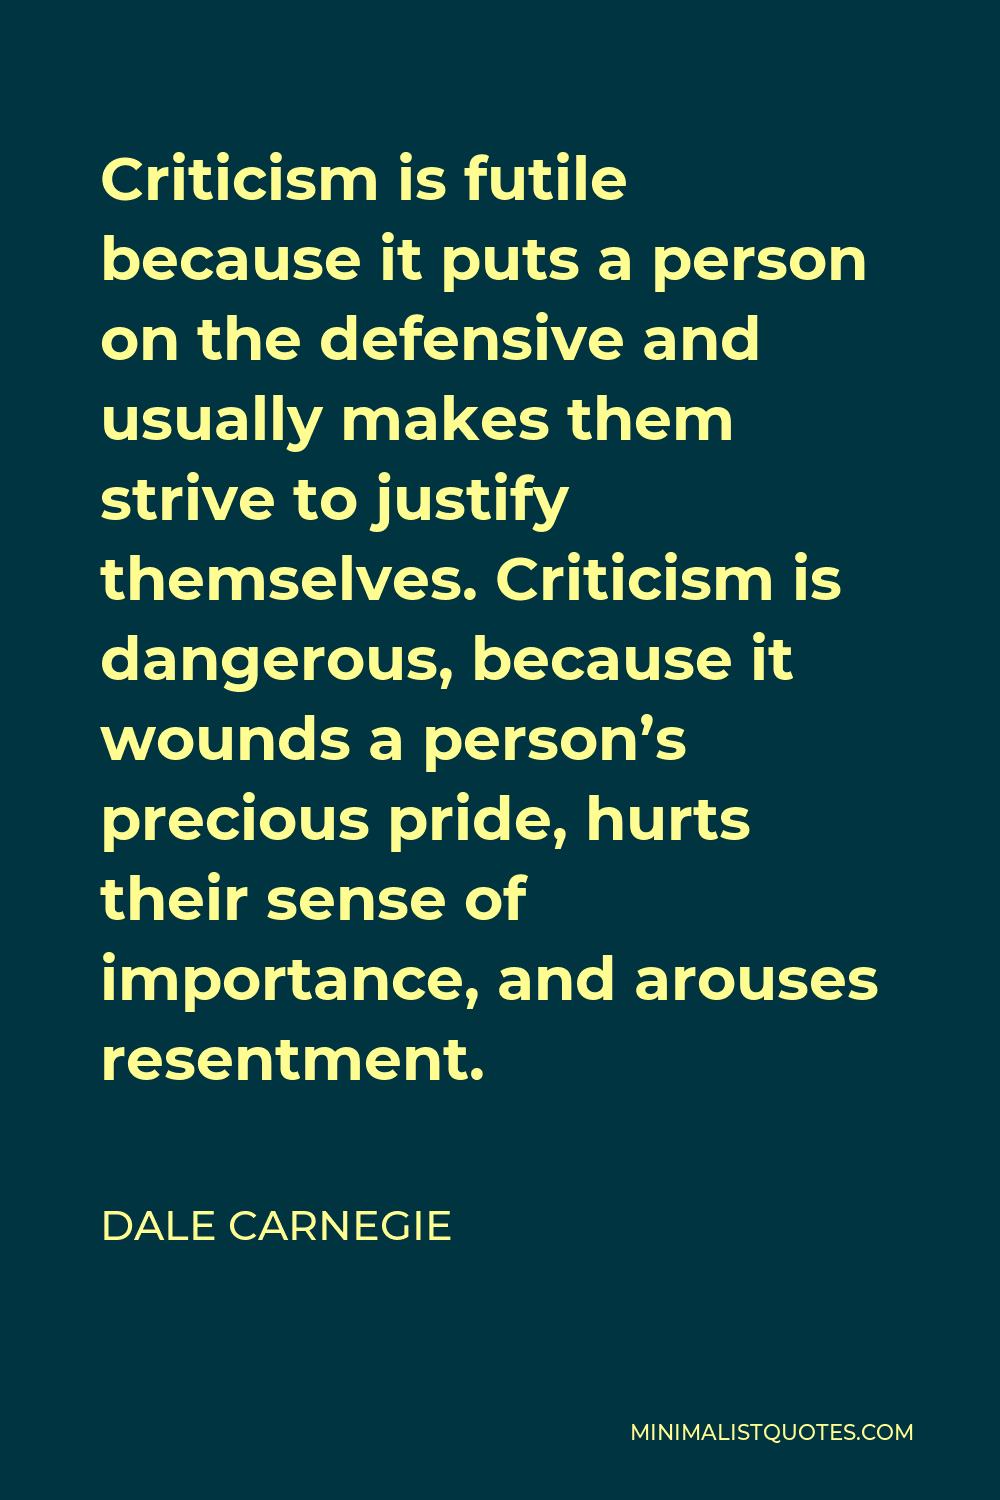 Dale Carnegie Quote - Criticism is futile because it puts a person on the defensive and usually makes them strive to justify themselves. Criticism is dangerous, because it wounds a person’s precious pride, hurts their sense of importance, and arouses resentment.